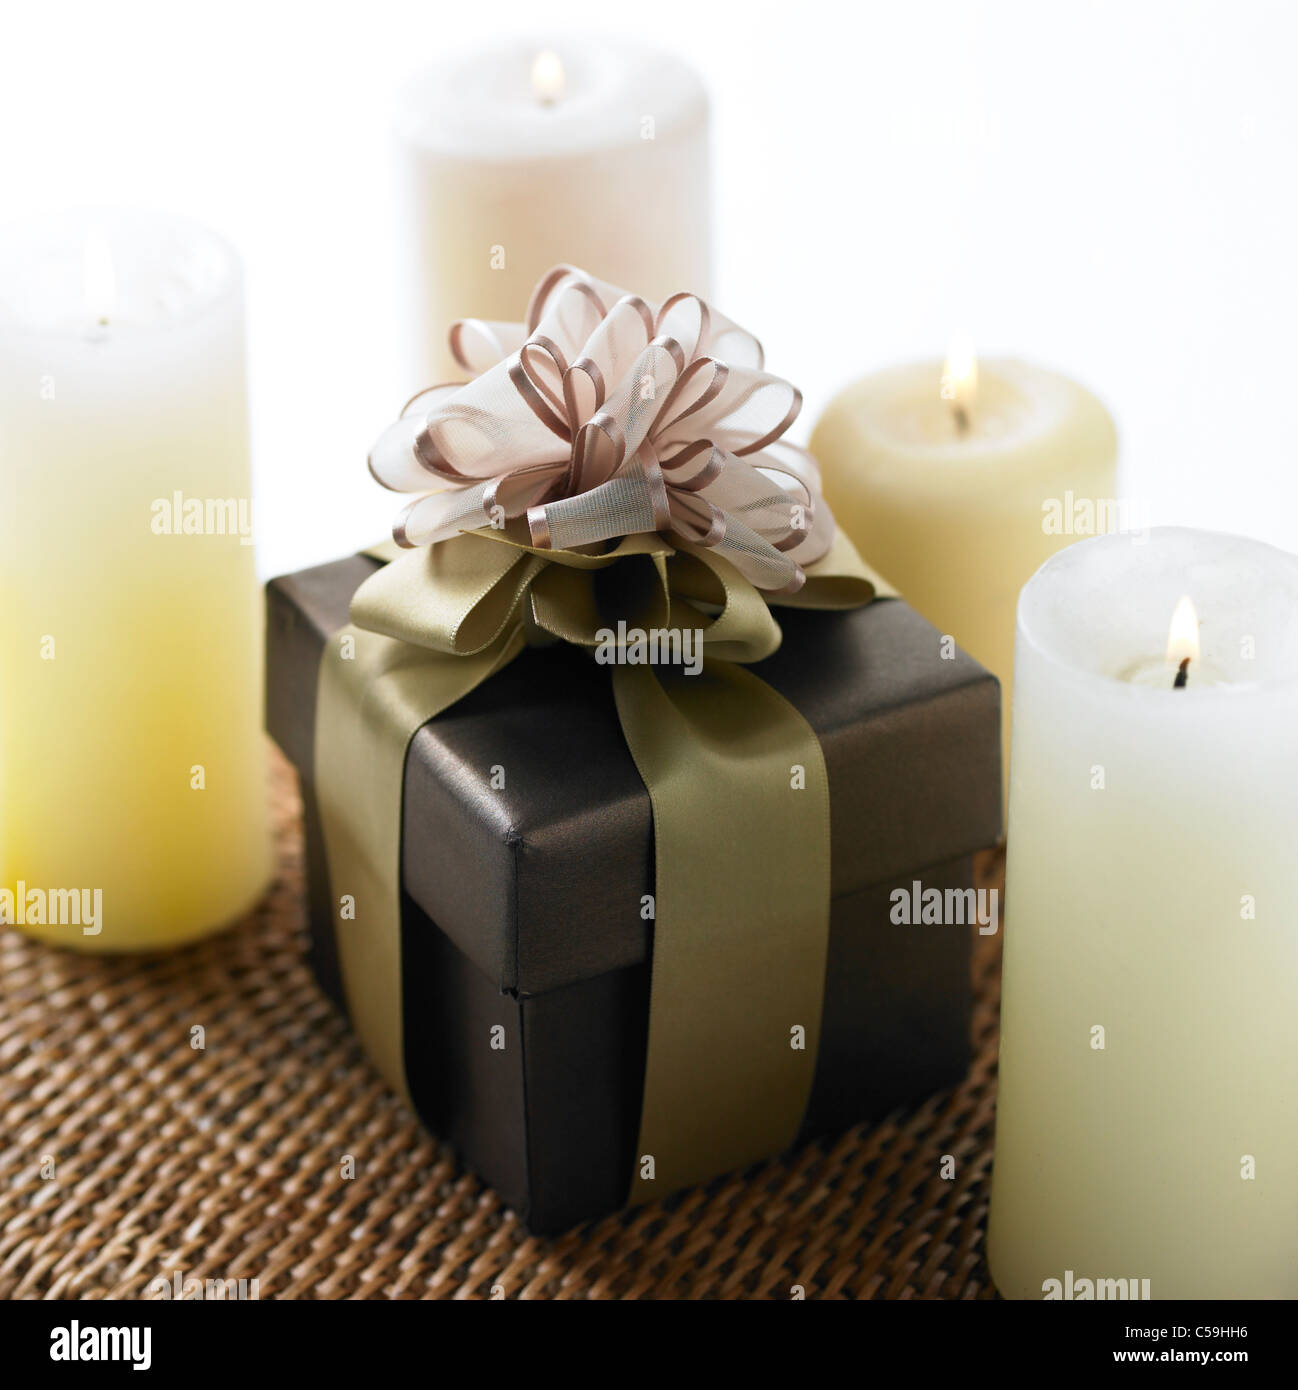 Close-up of Gift box with candles Stock Photo